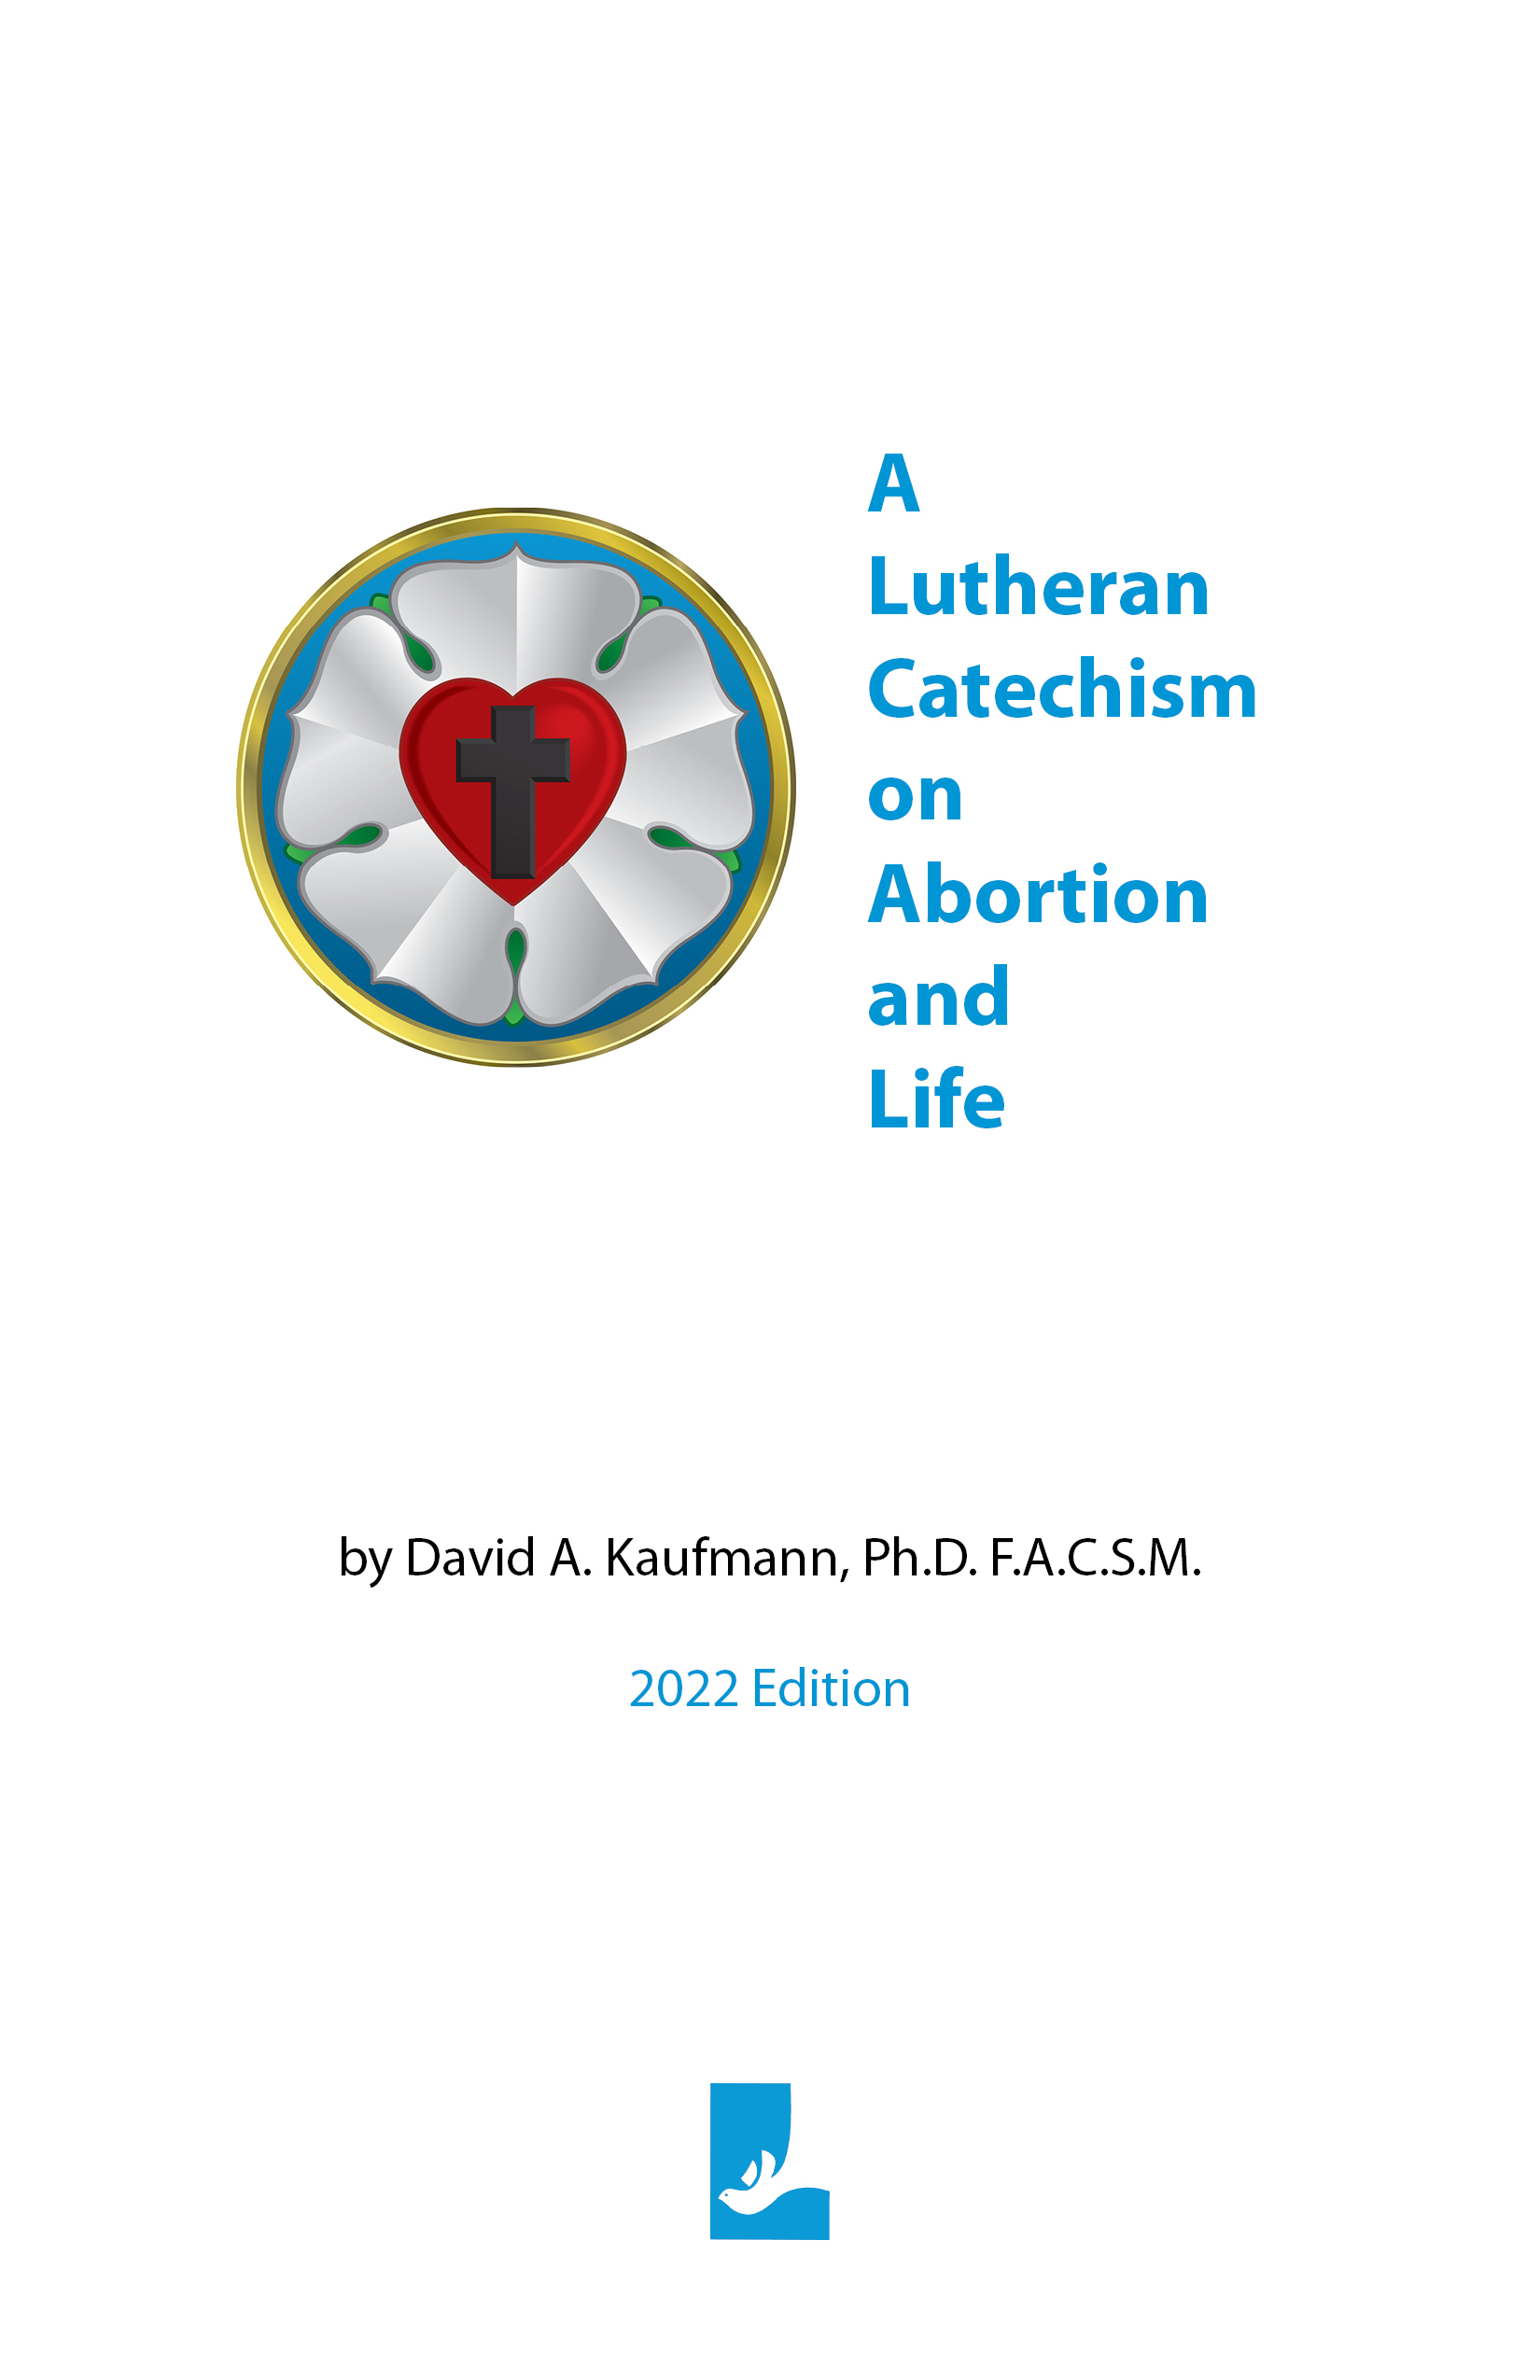 A Lutheran Catechism on Abortion and Life